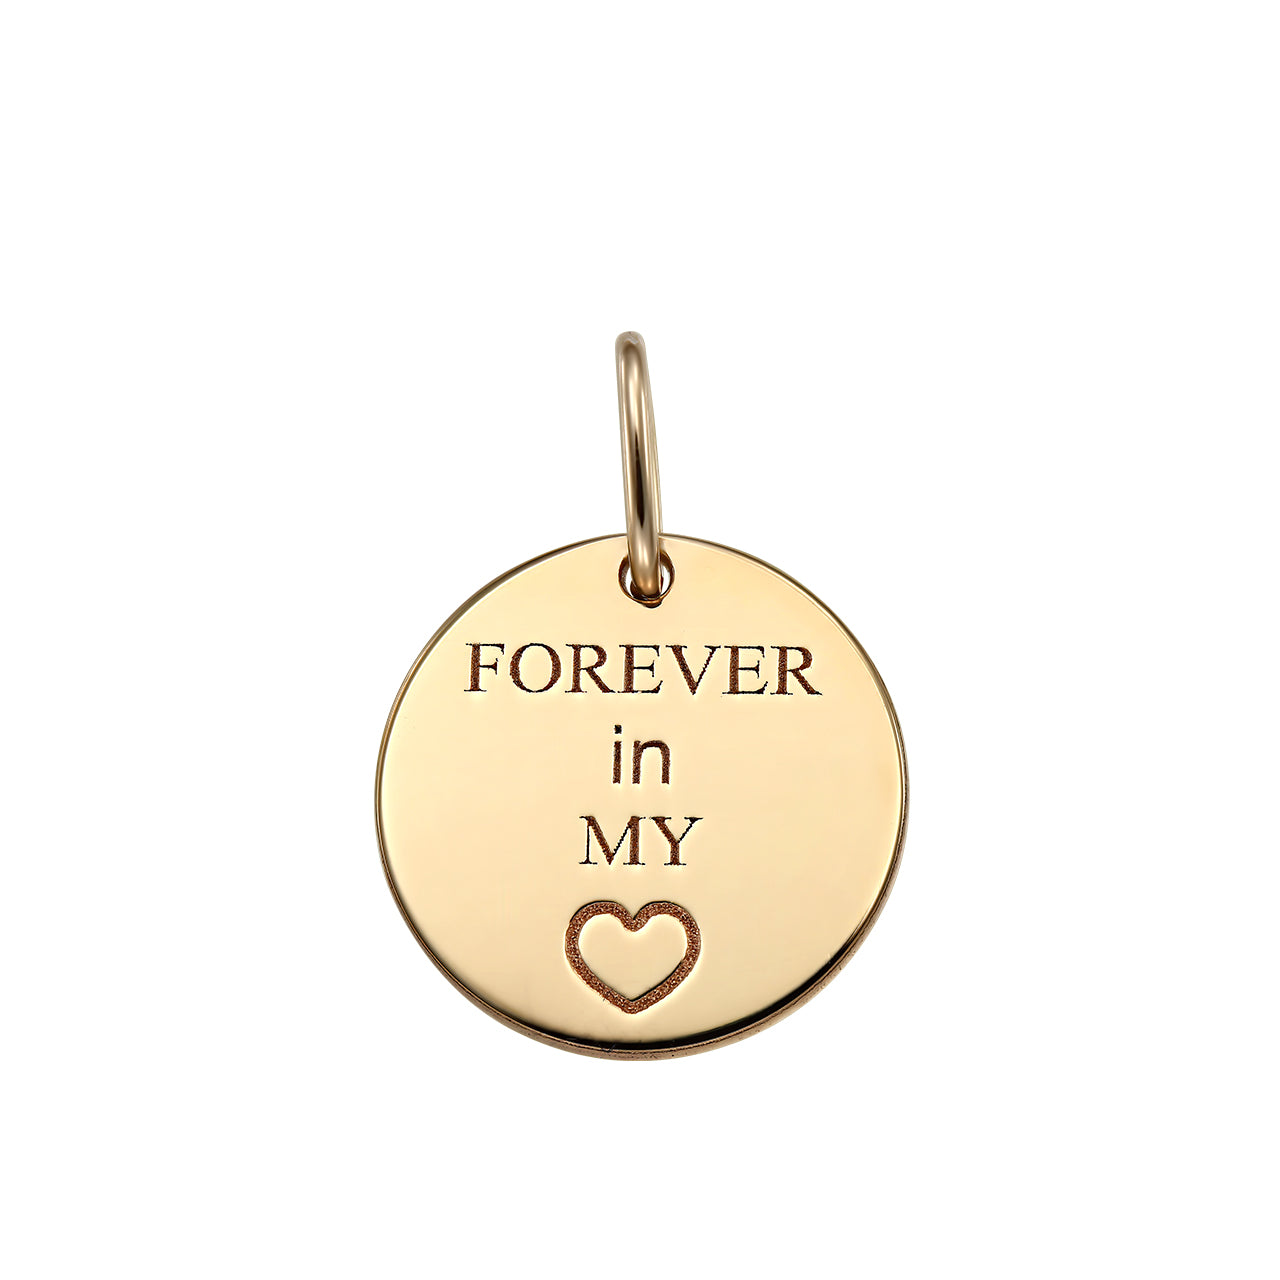 Pendant round Forever in my heart, in rose gold - zeaetsia